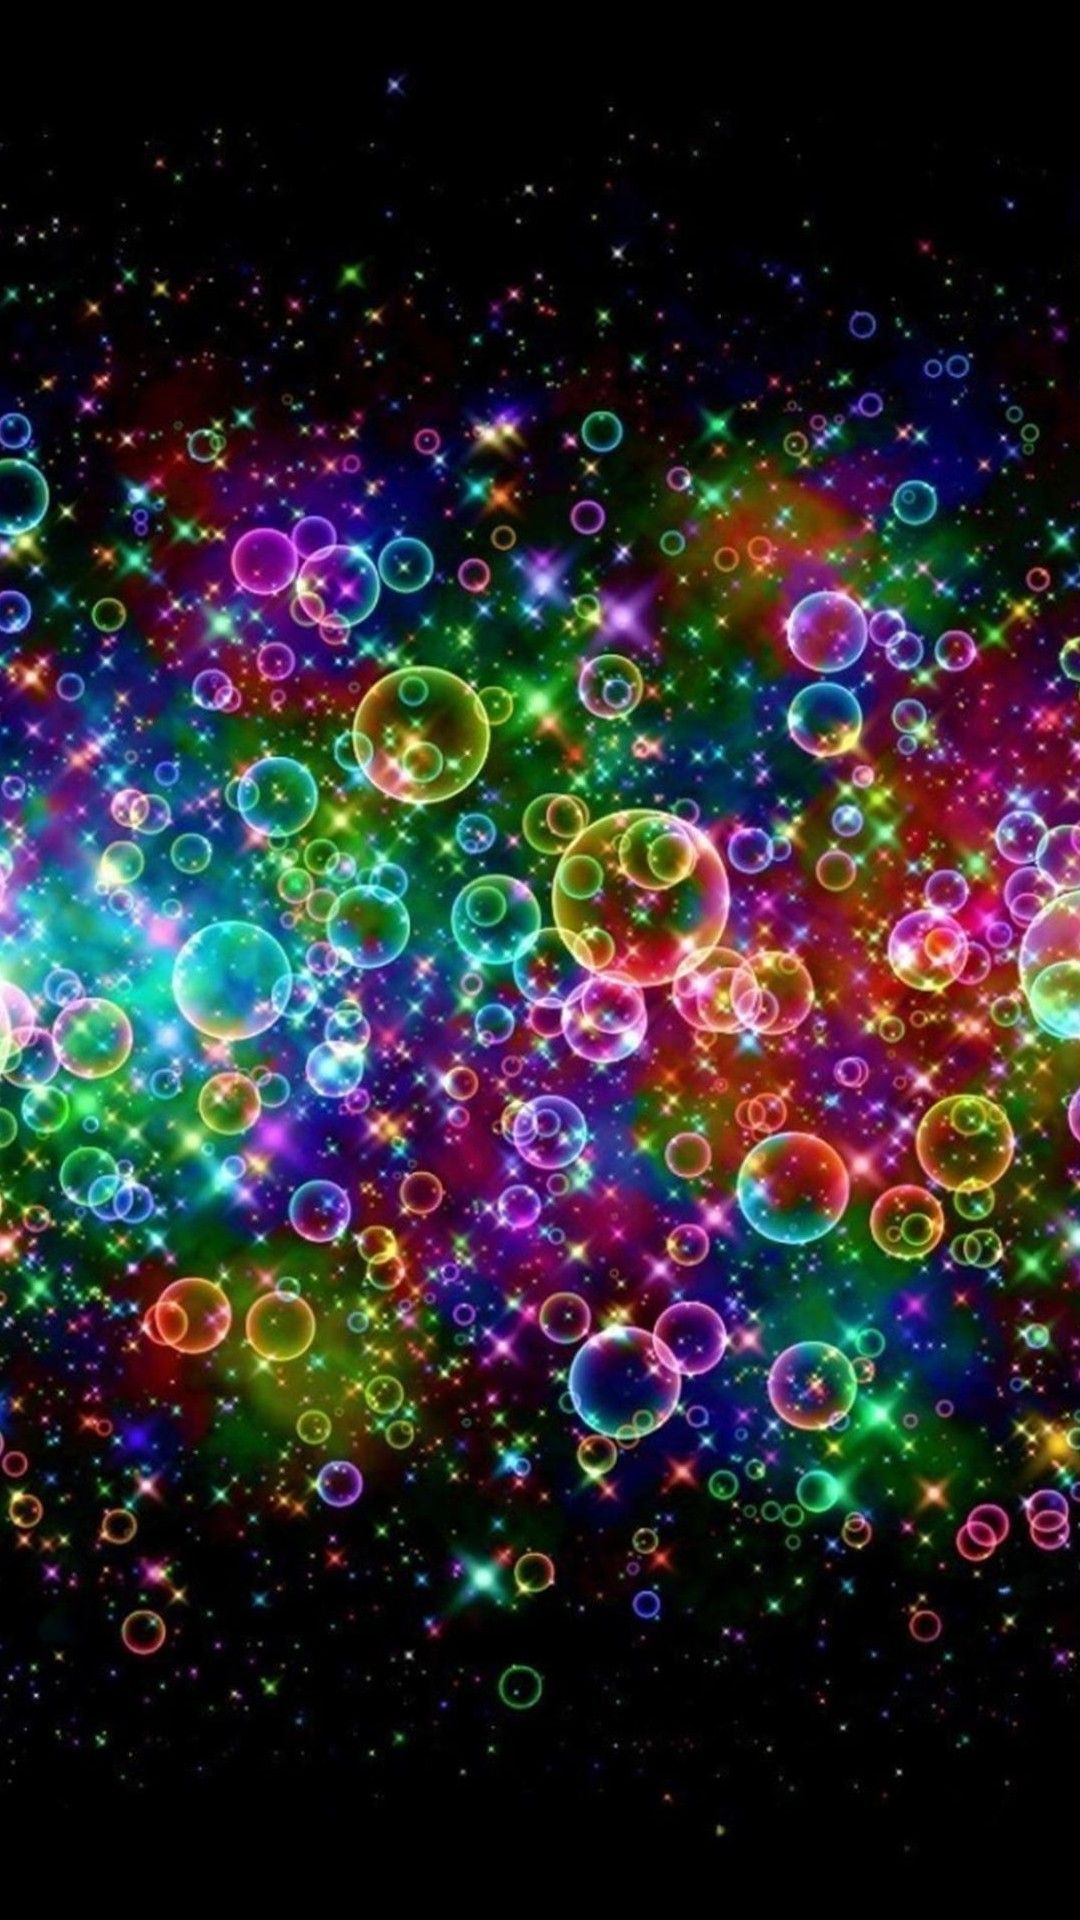 Clever Abstract iPhone Wallpaper For Art Lovers. Bubbles